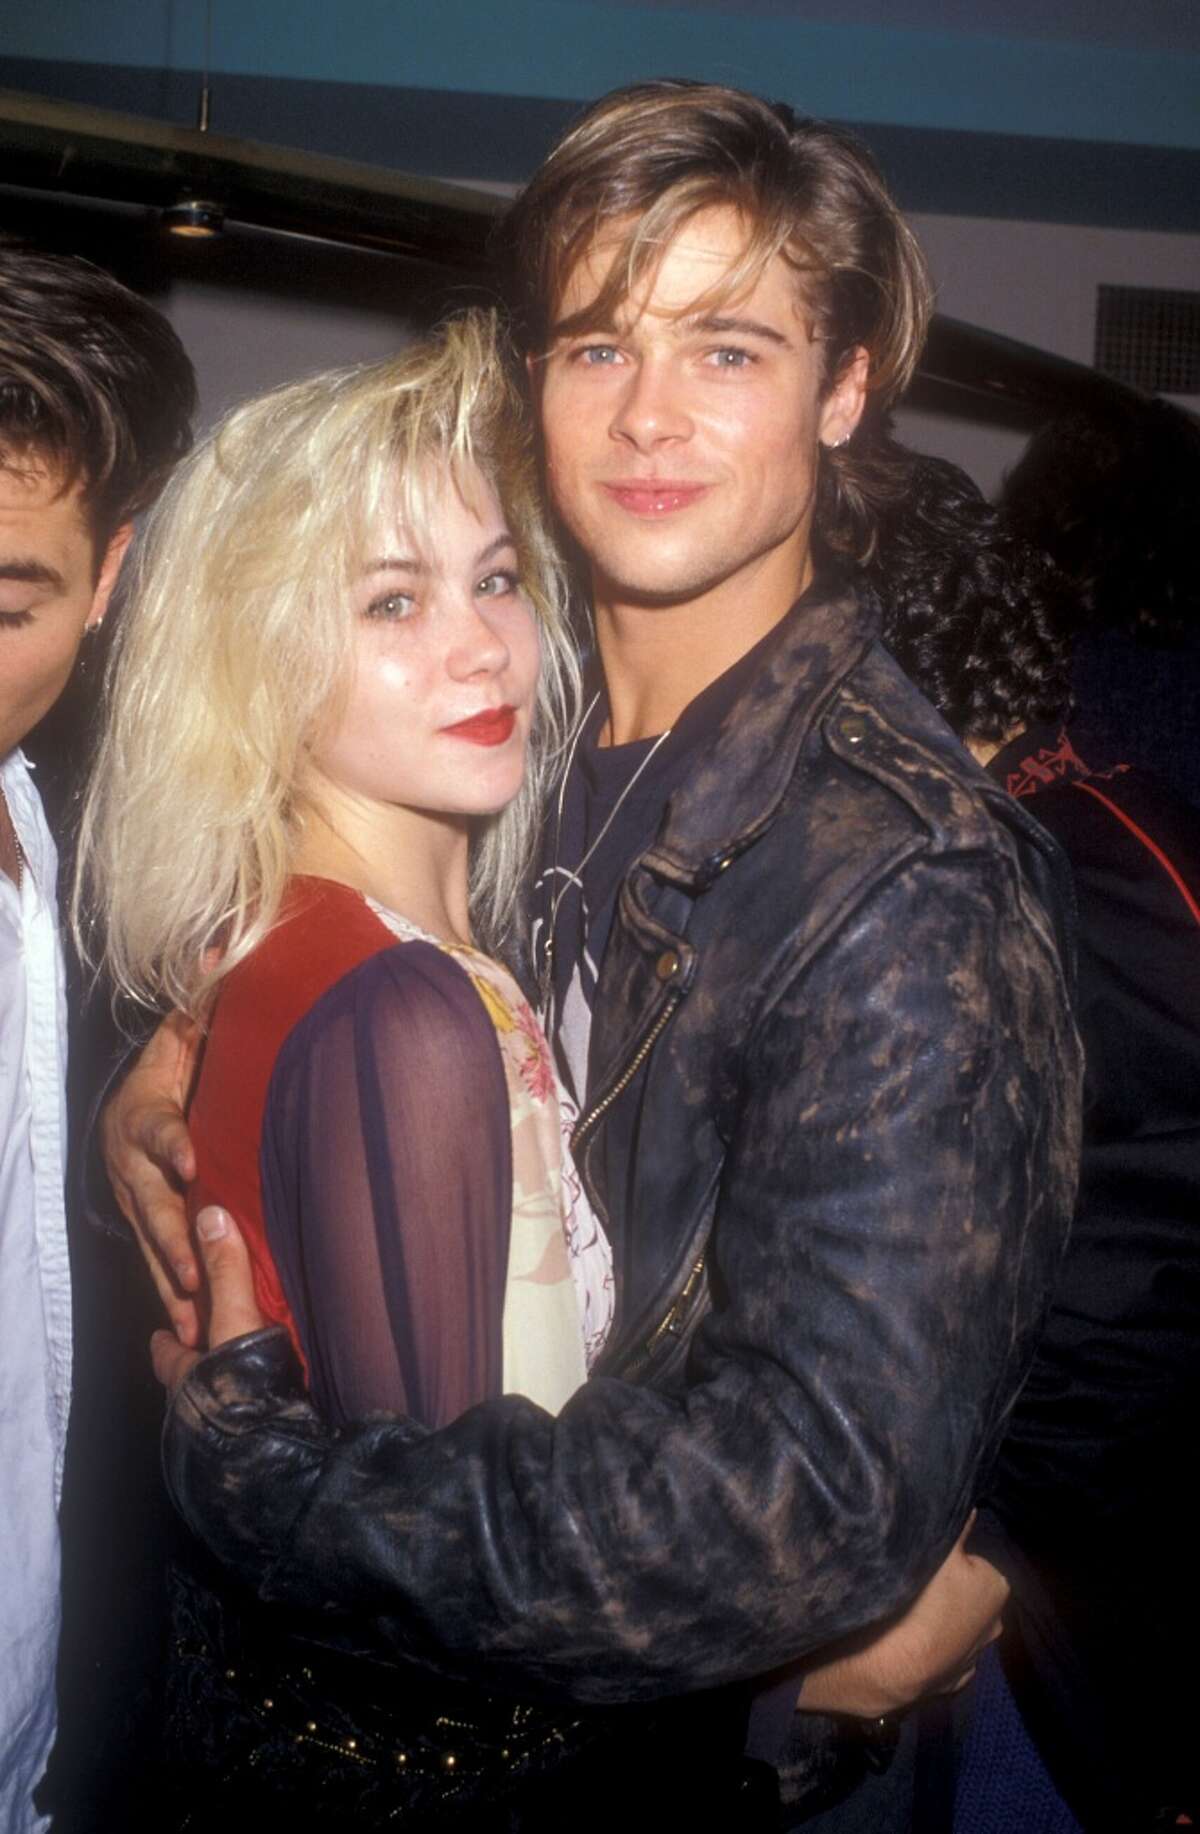 Before Brad Pitt was super famous, and Christina Applegate was at the height of her "Married With Children" fame, these two dated. She reportedly took him to the MTV Movies Awards — and ditched him.